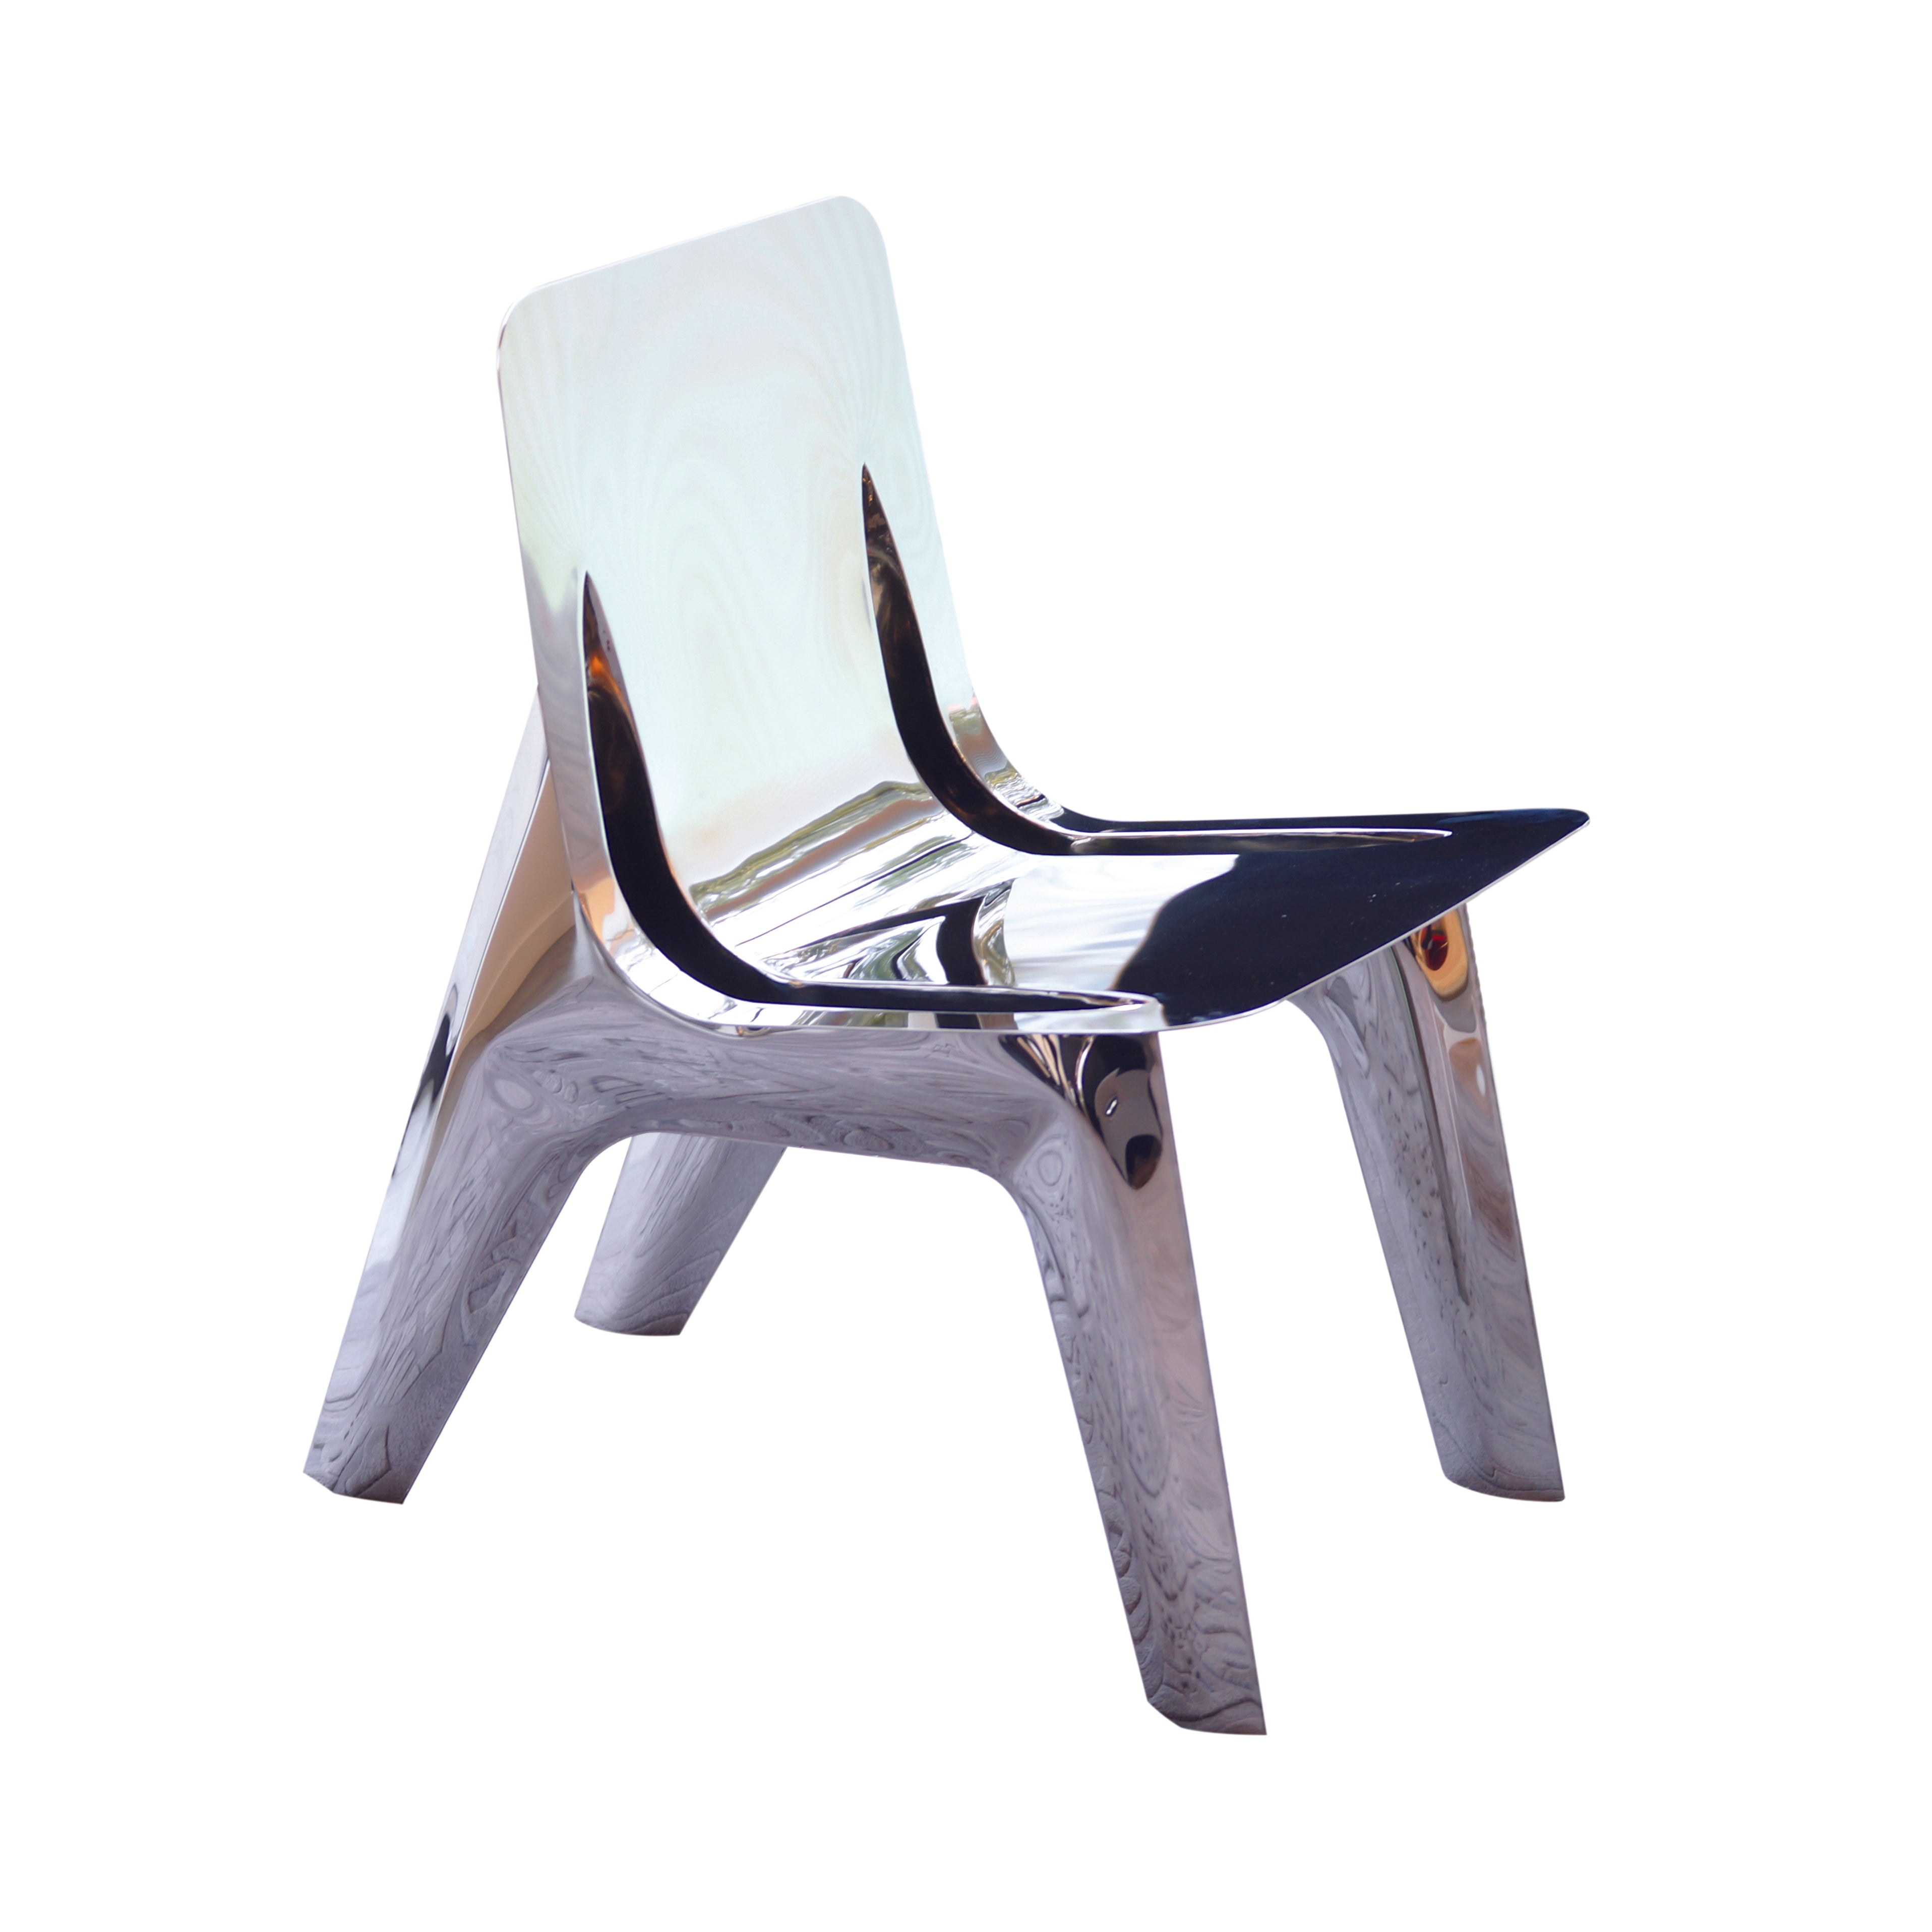 J-Chair: Stainless Steel + Inox Polished